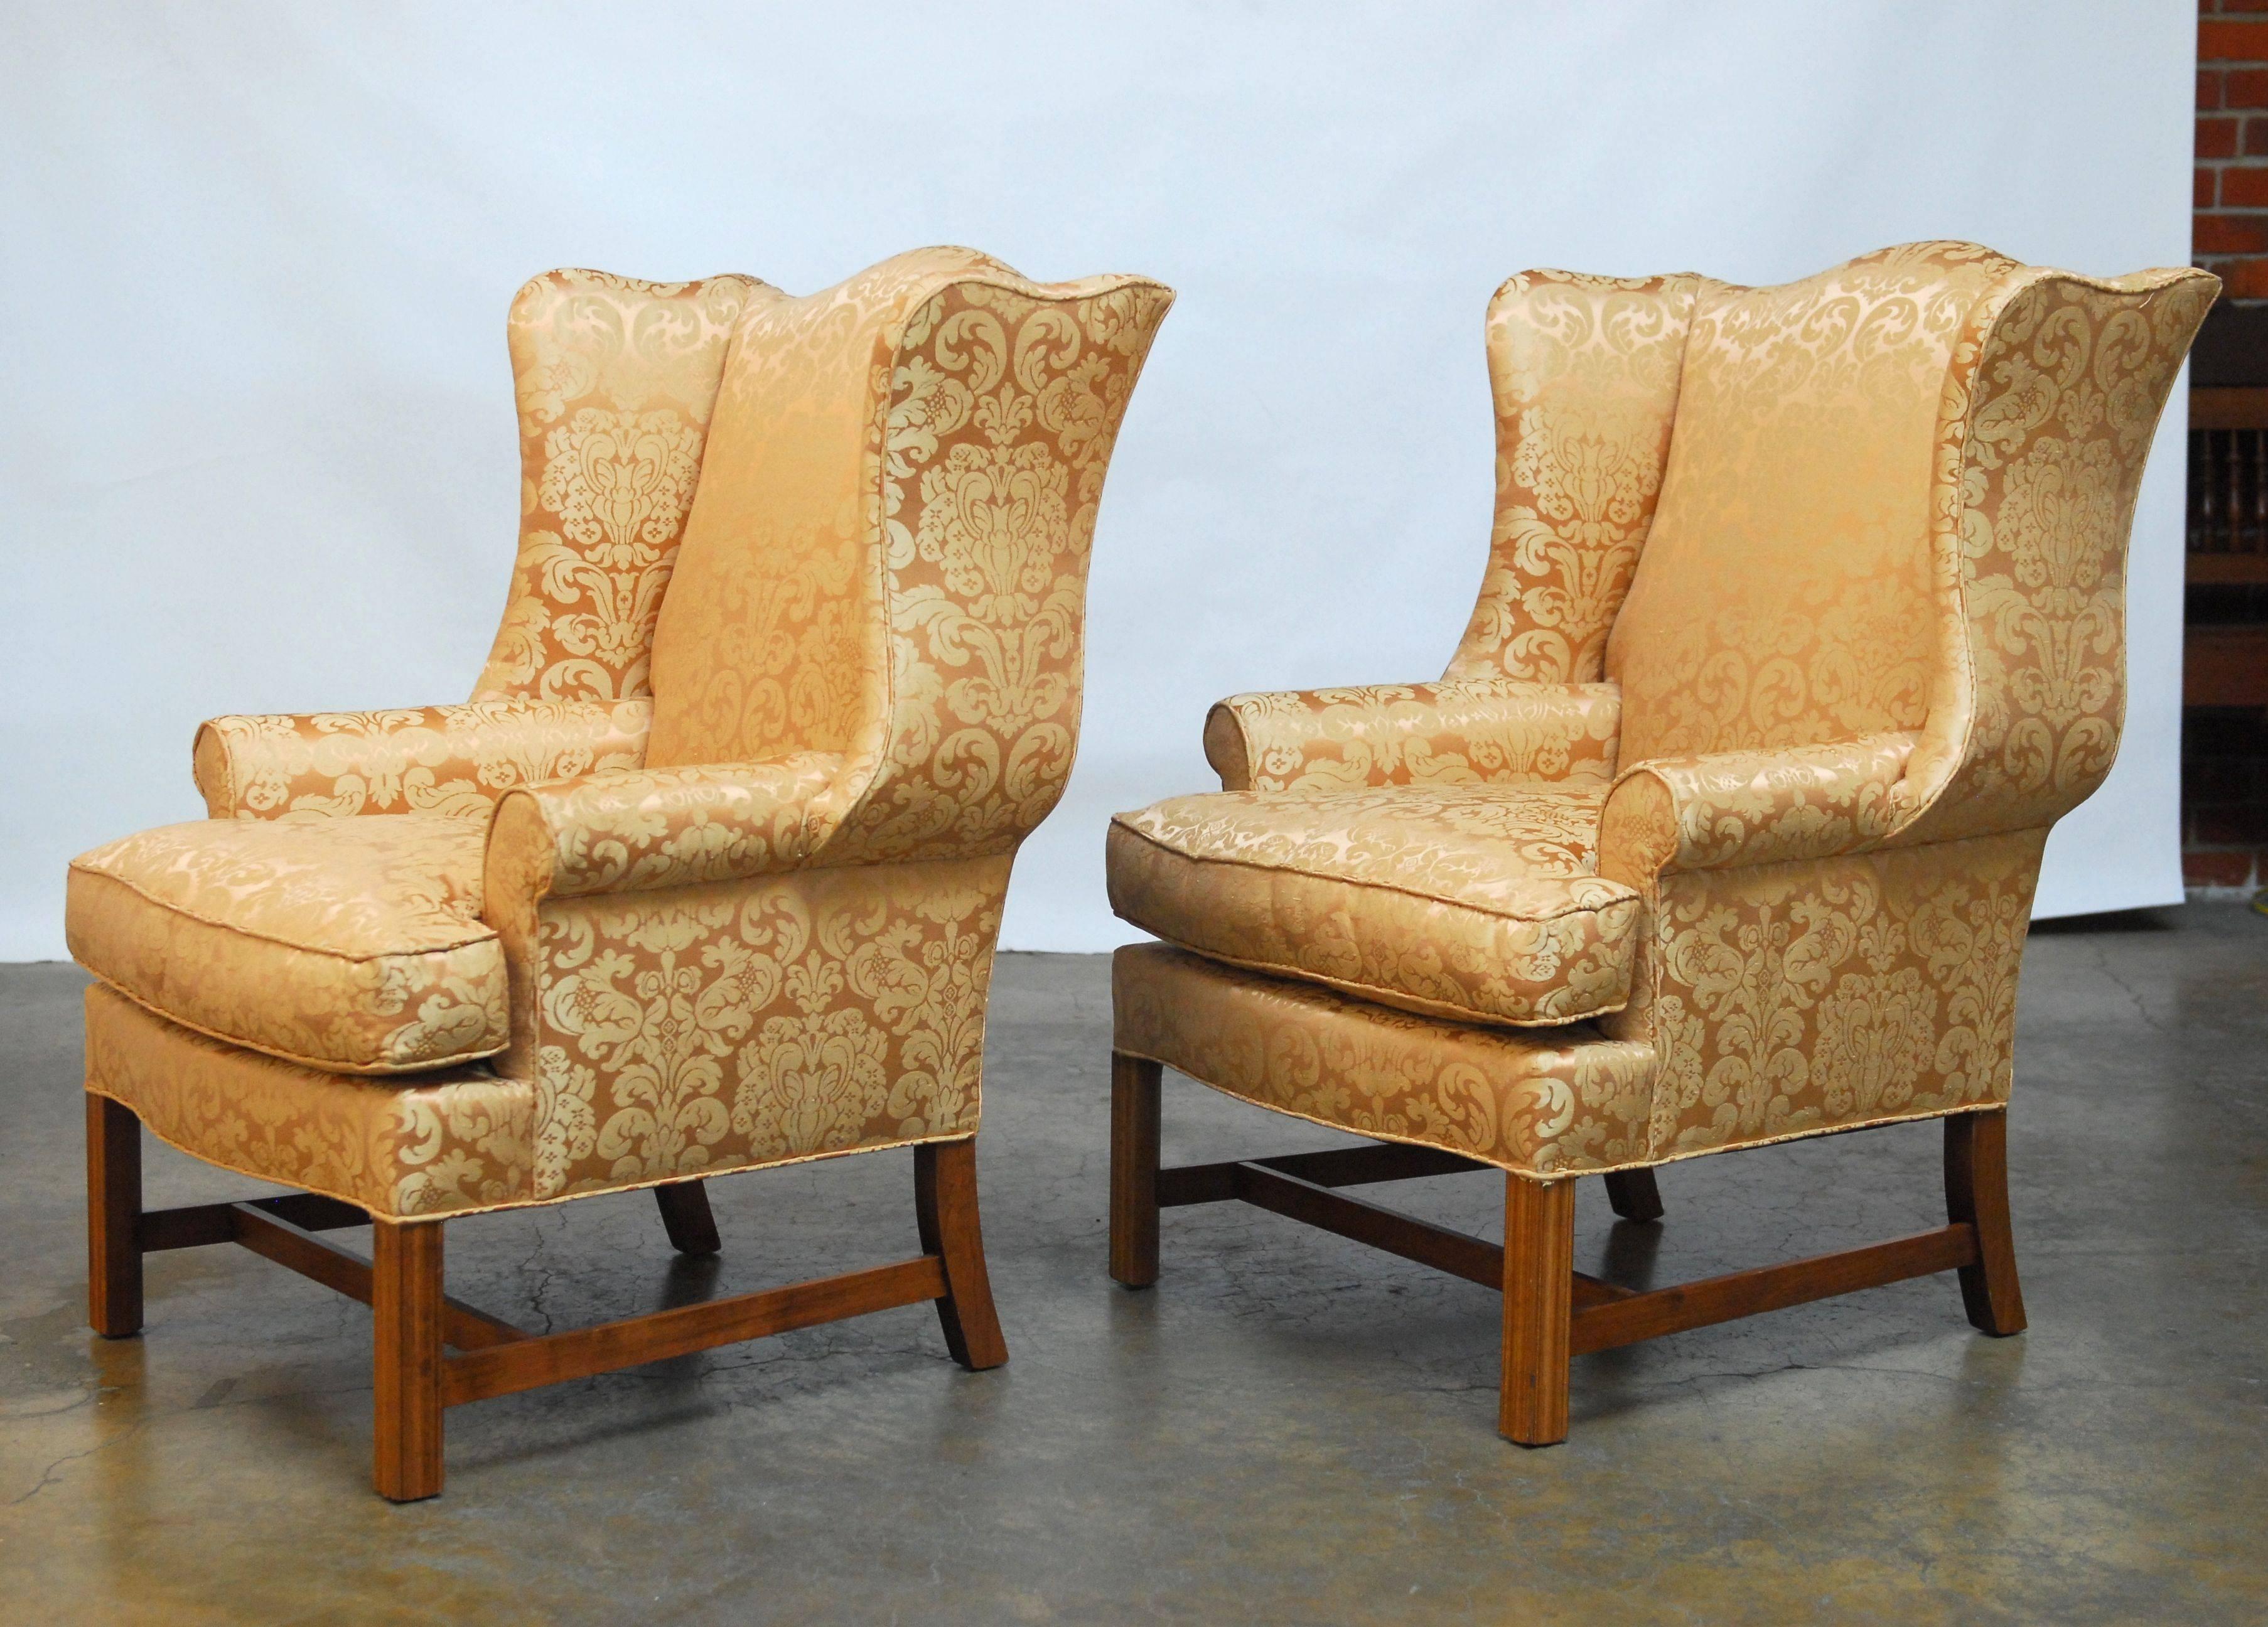 Pair of gorgeous wingback chairs with fully developed serpentine wings and generous proportions. Featuring a rose quartz color damascus silk upholstery. Supported by square chamfered molded legs with a cross stretcher. These chairs were recently